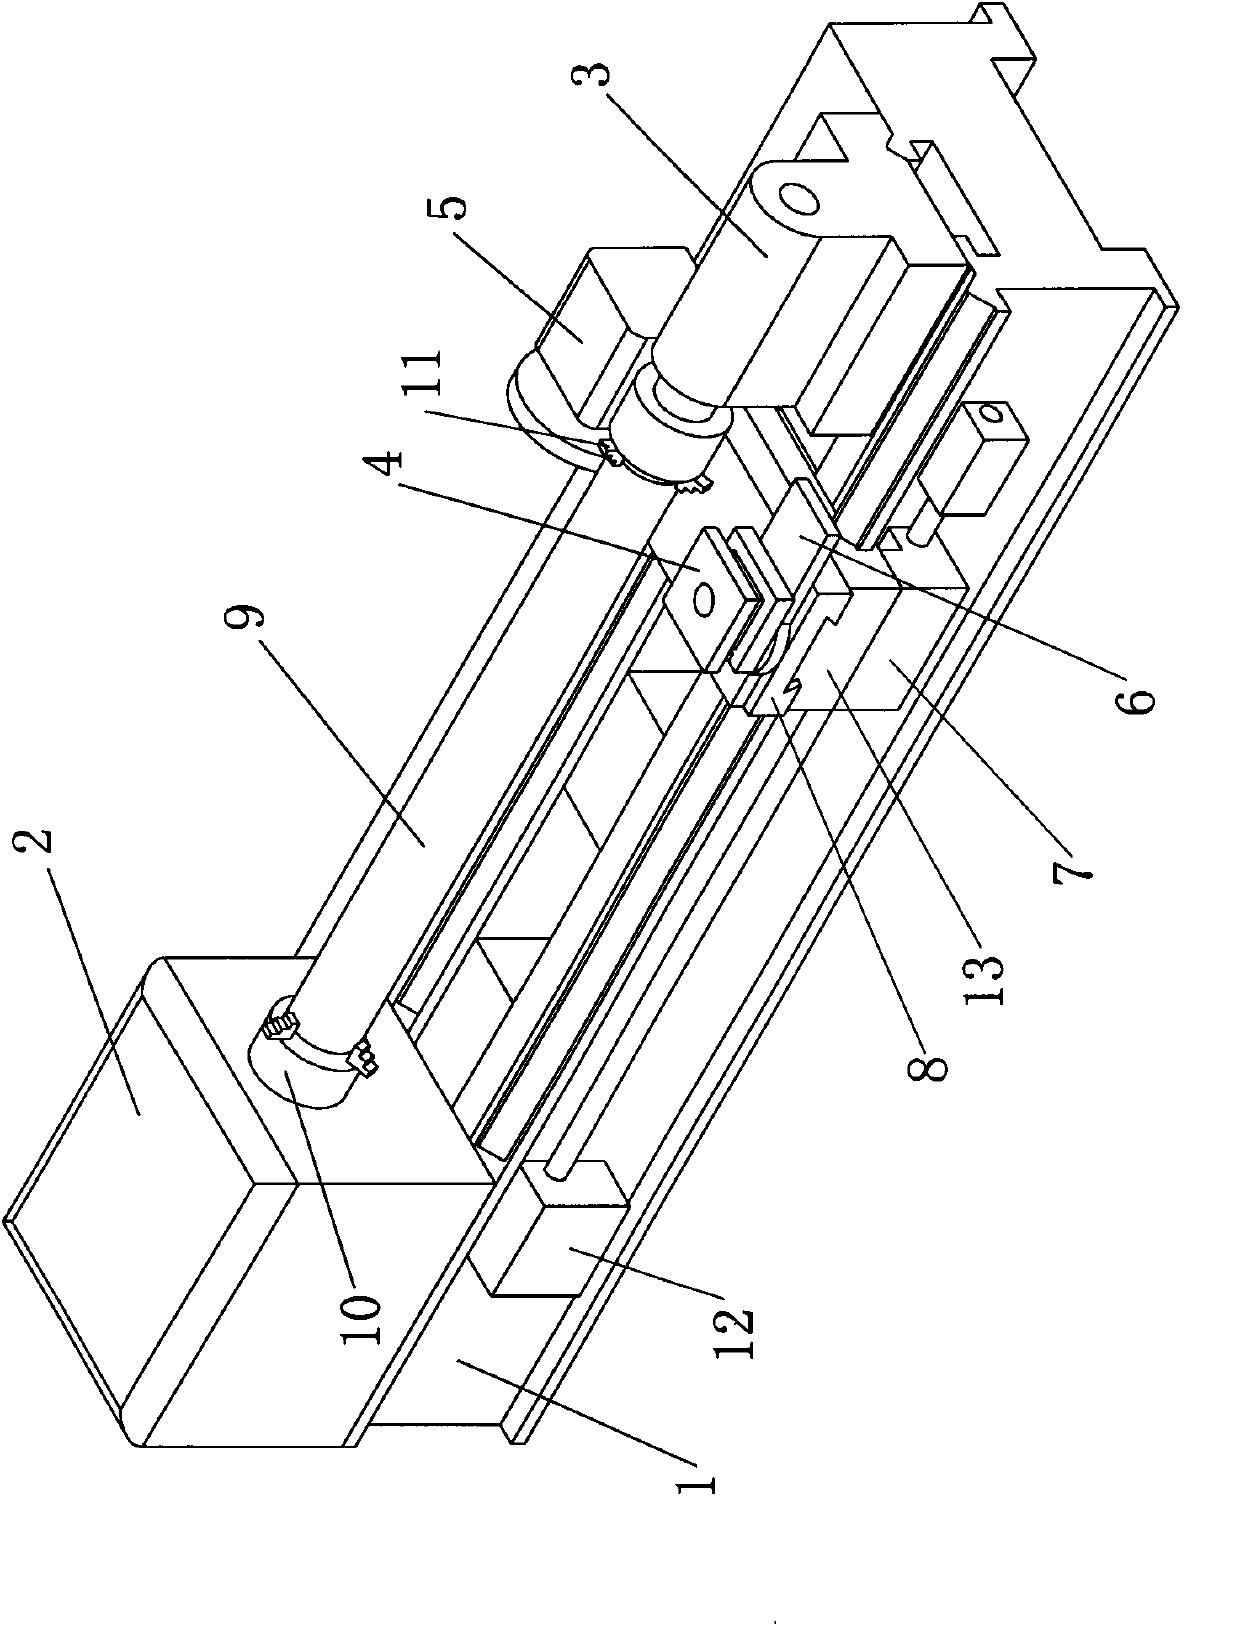 Machine tool for grinding composite workpiece under tensioning state